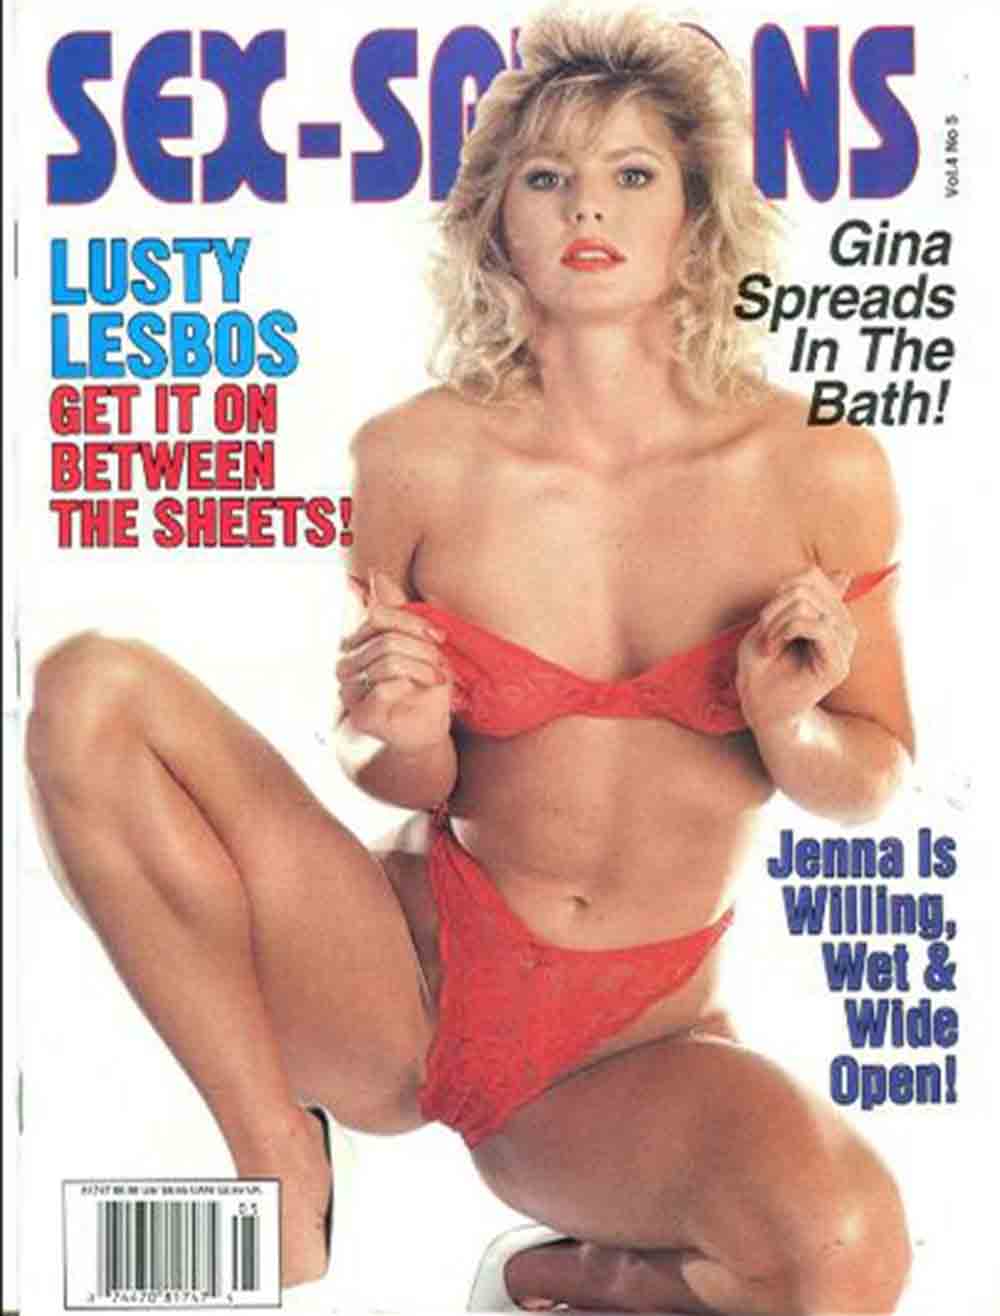 Sex-Sations Vol. 4 # 5 magazine back issue Sex-Sations magizine back copy 